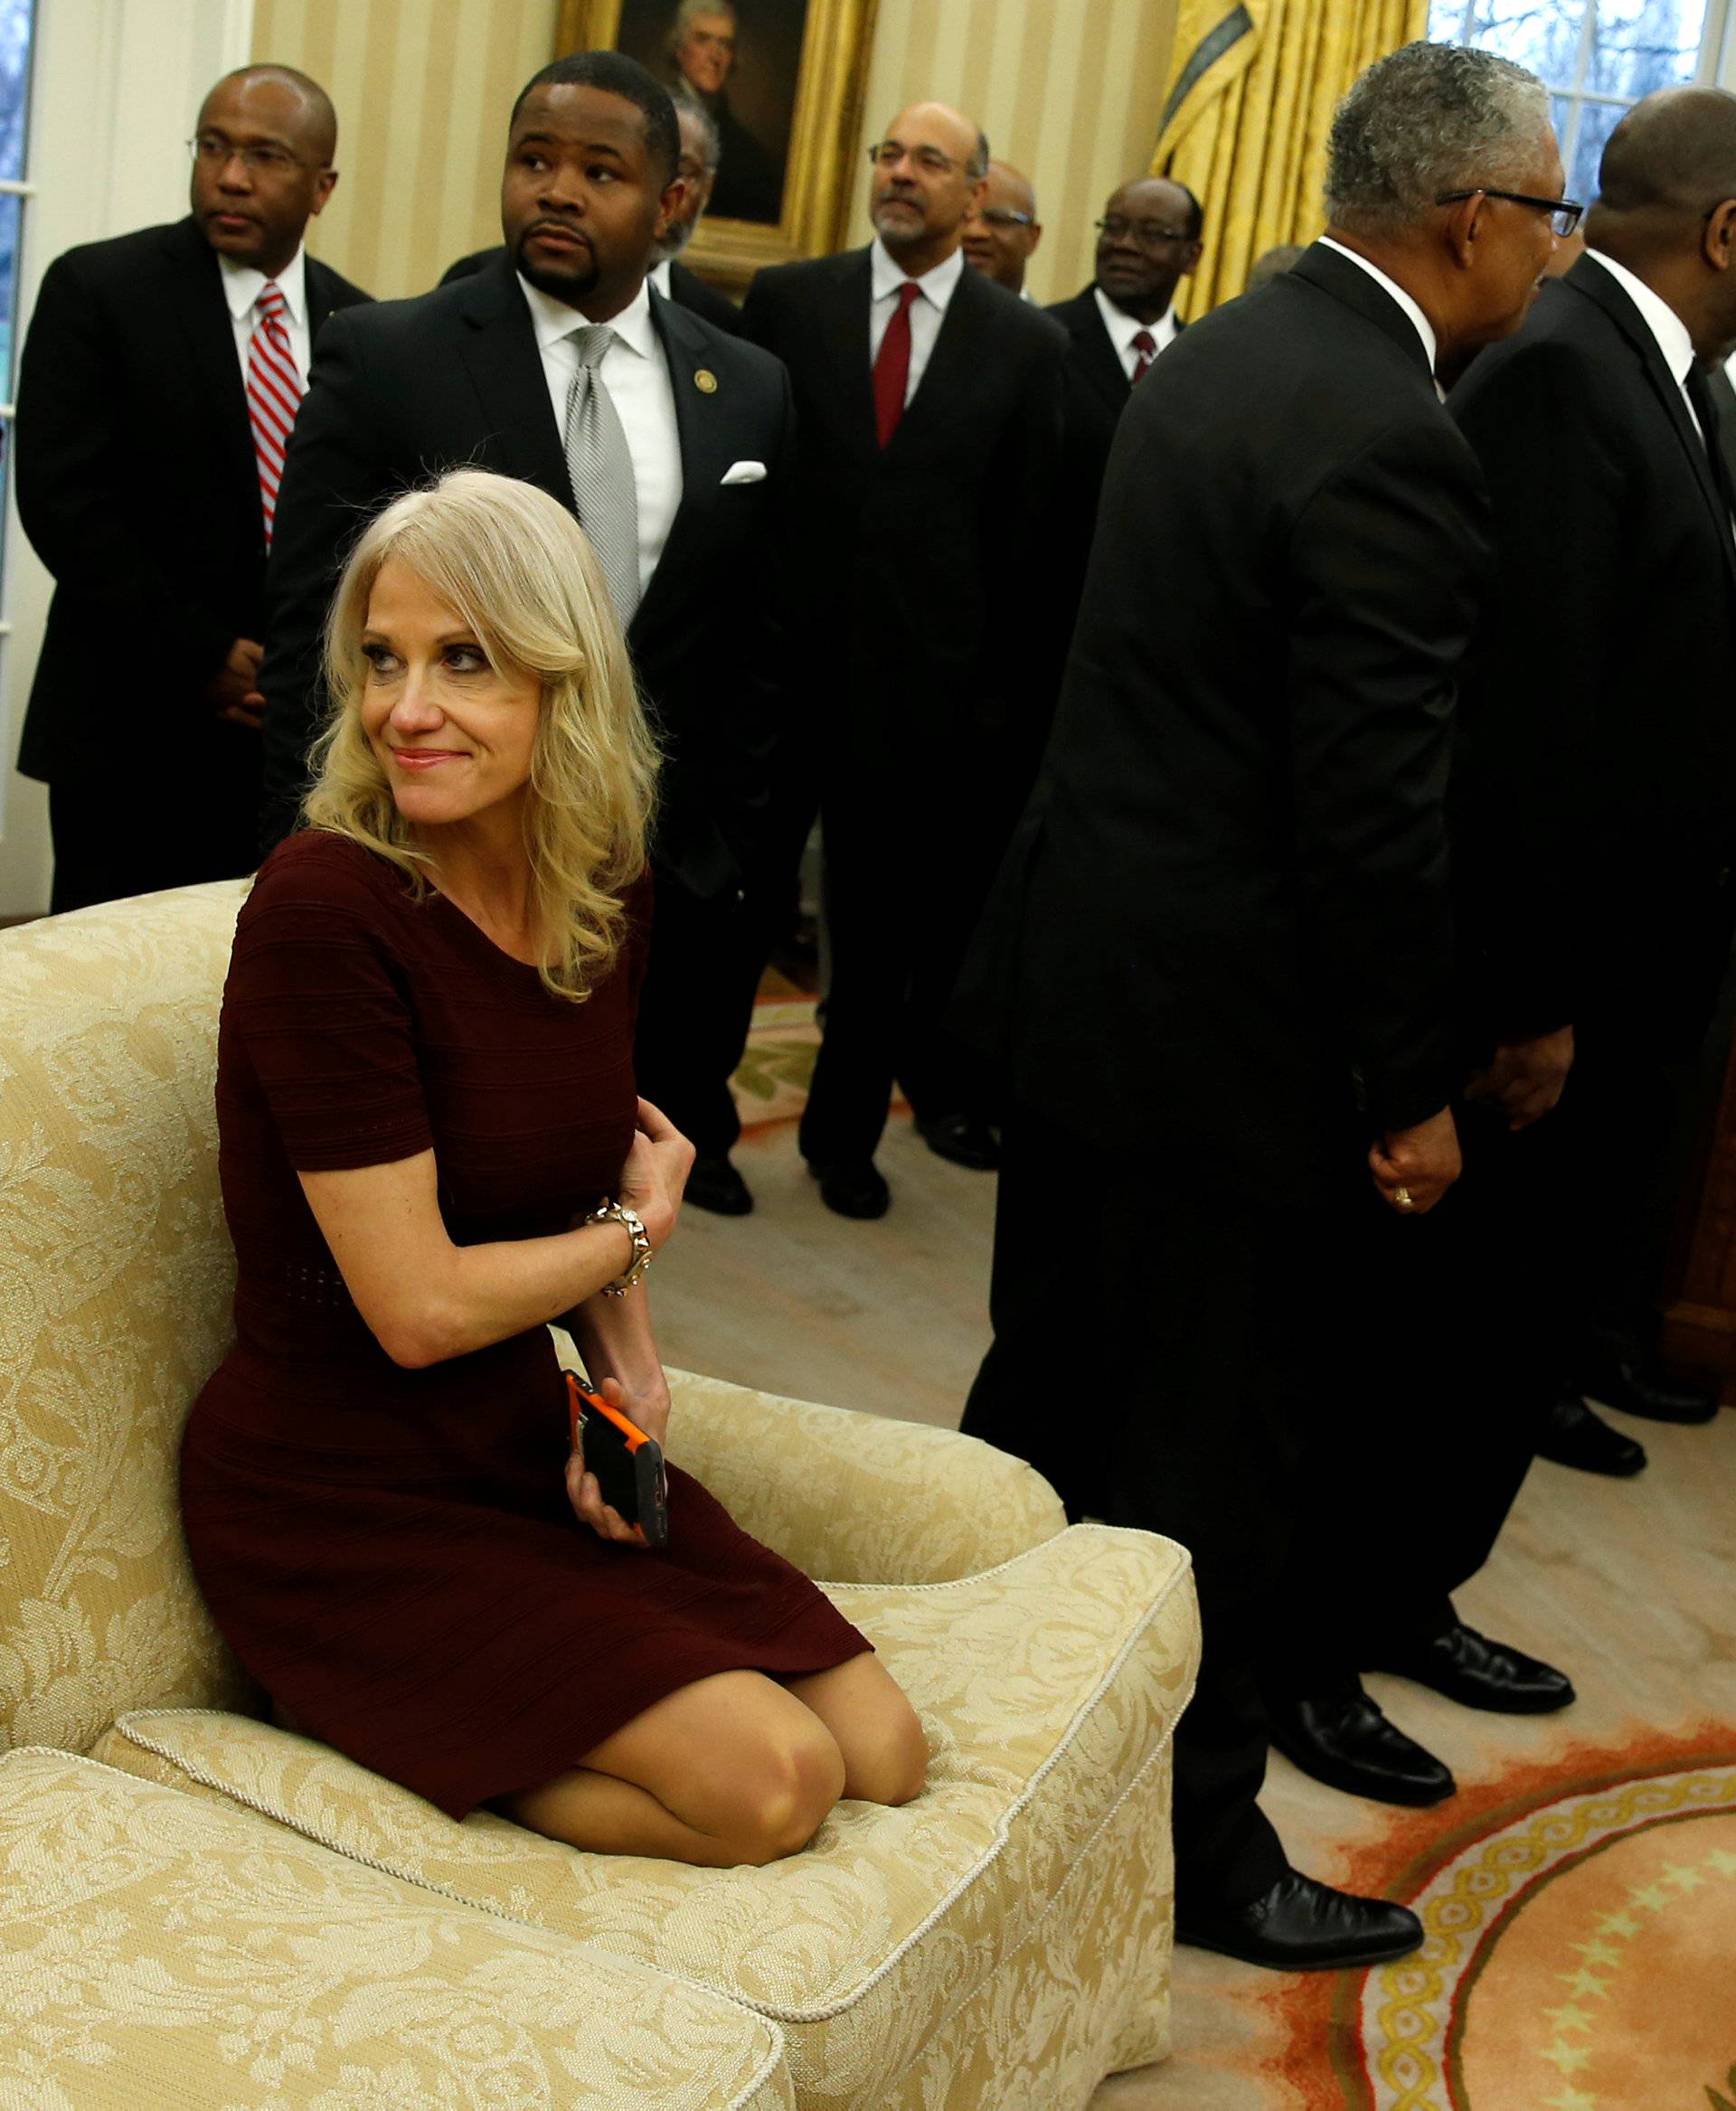 Conway attends as Trump welcomes the leaders of dozens of historically black colleges and universities (HBCU) in the Oval Office at the White House in Washington